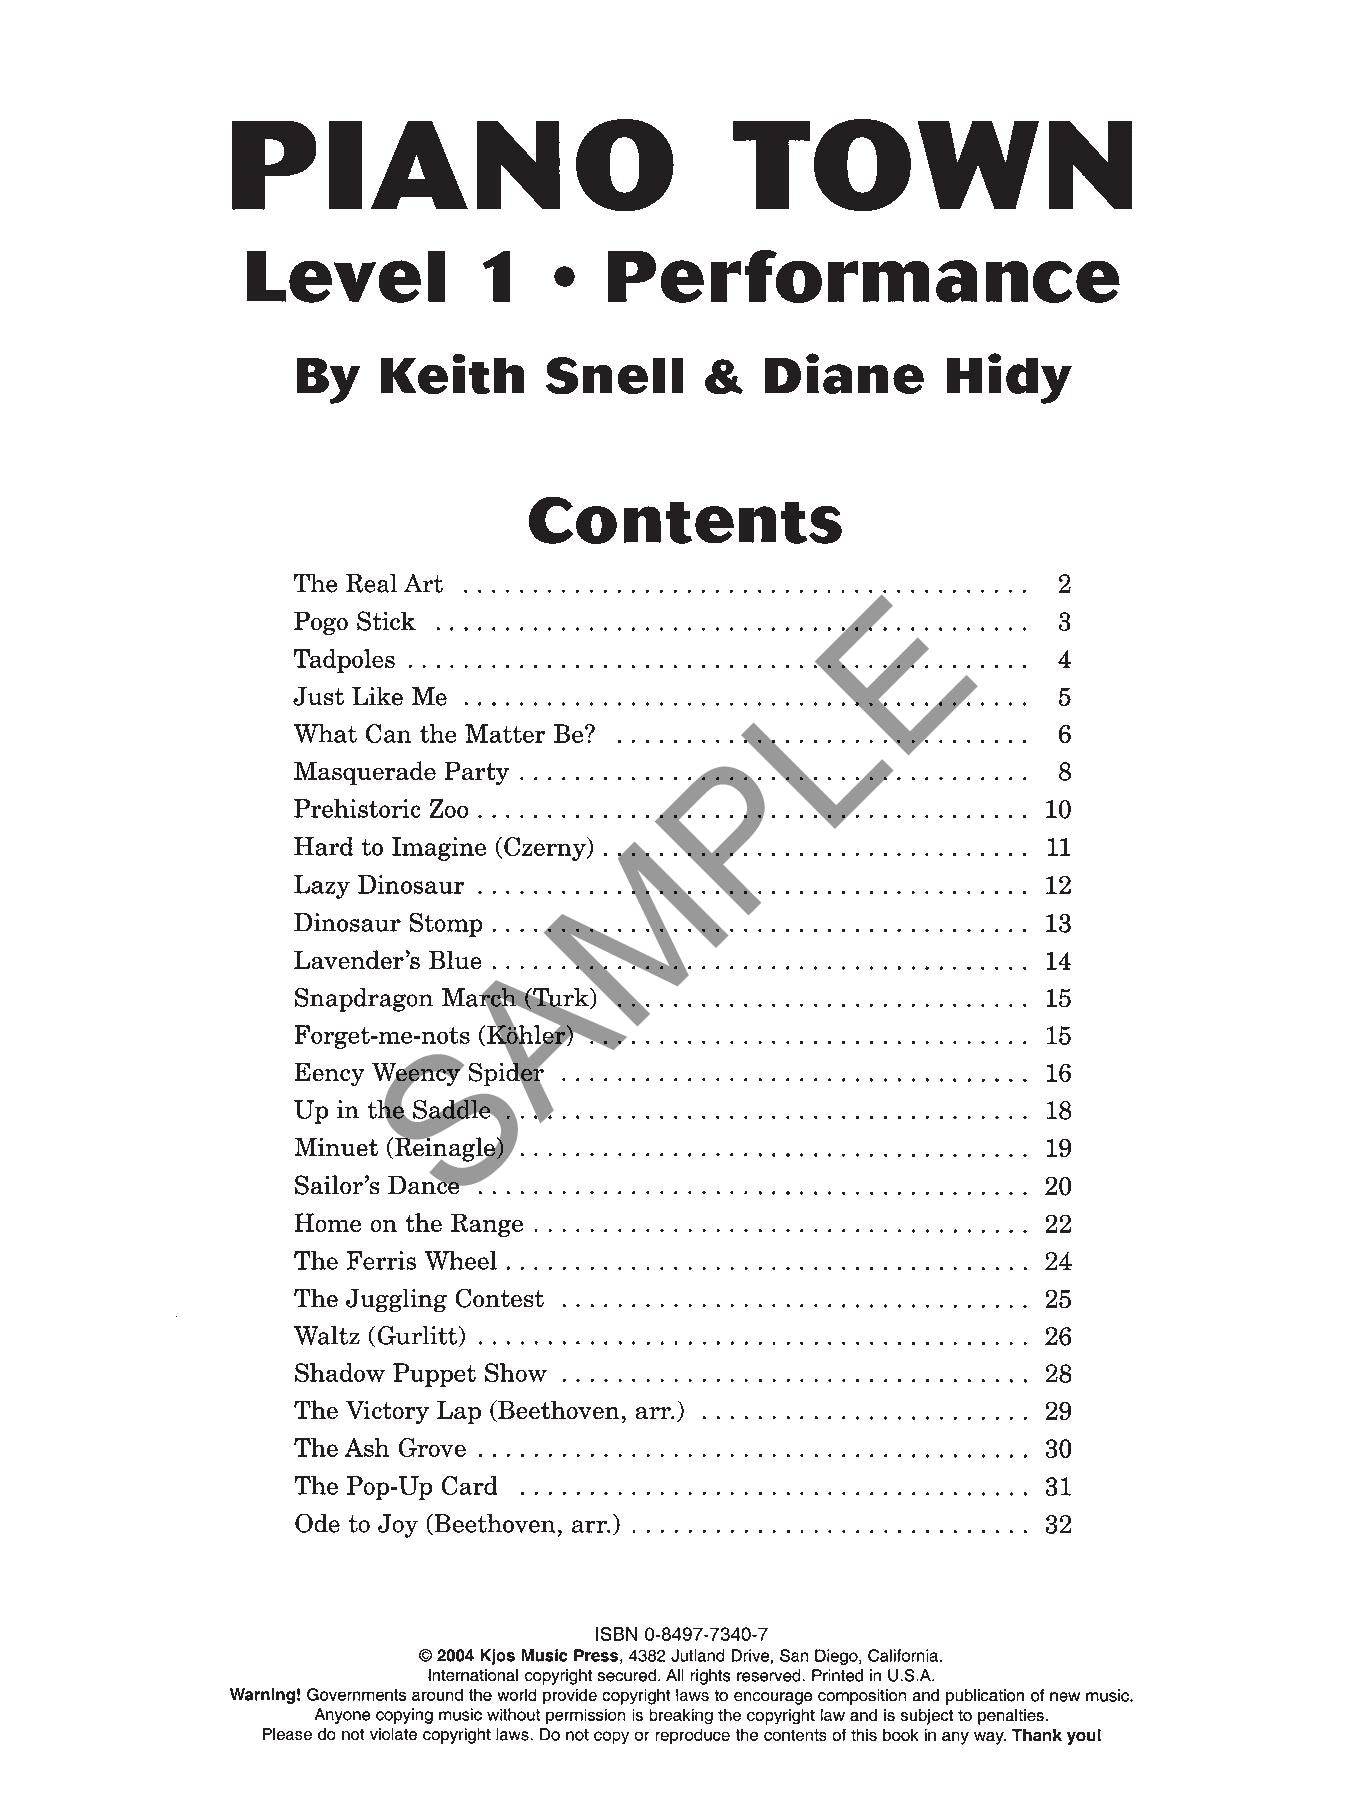 Piano Town Performance, Level 1